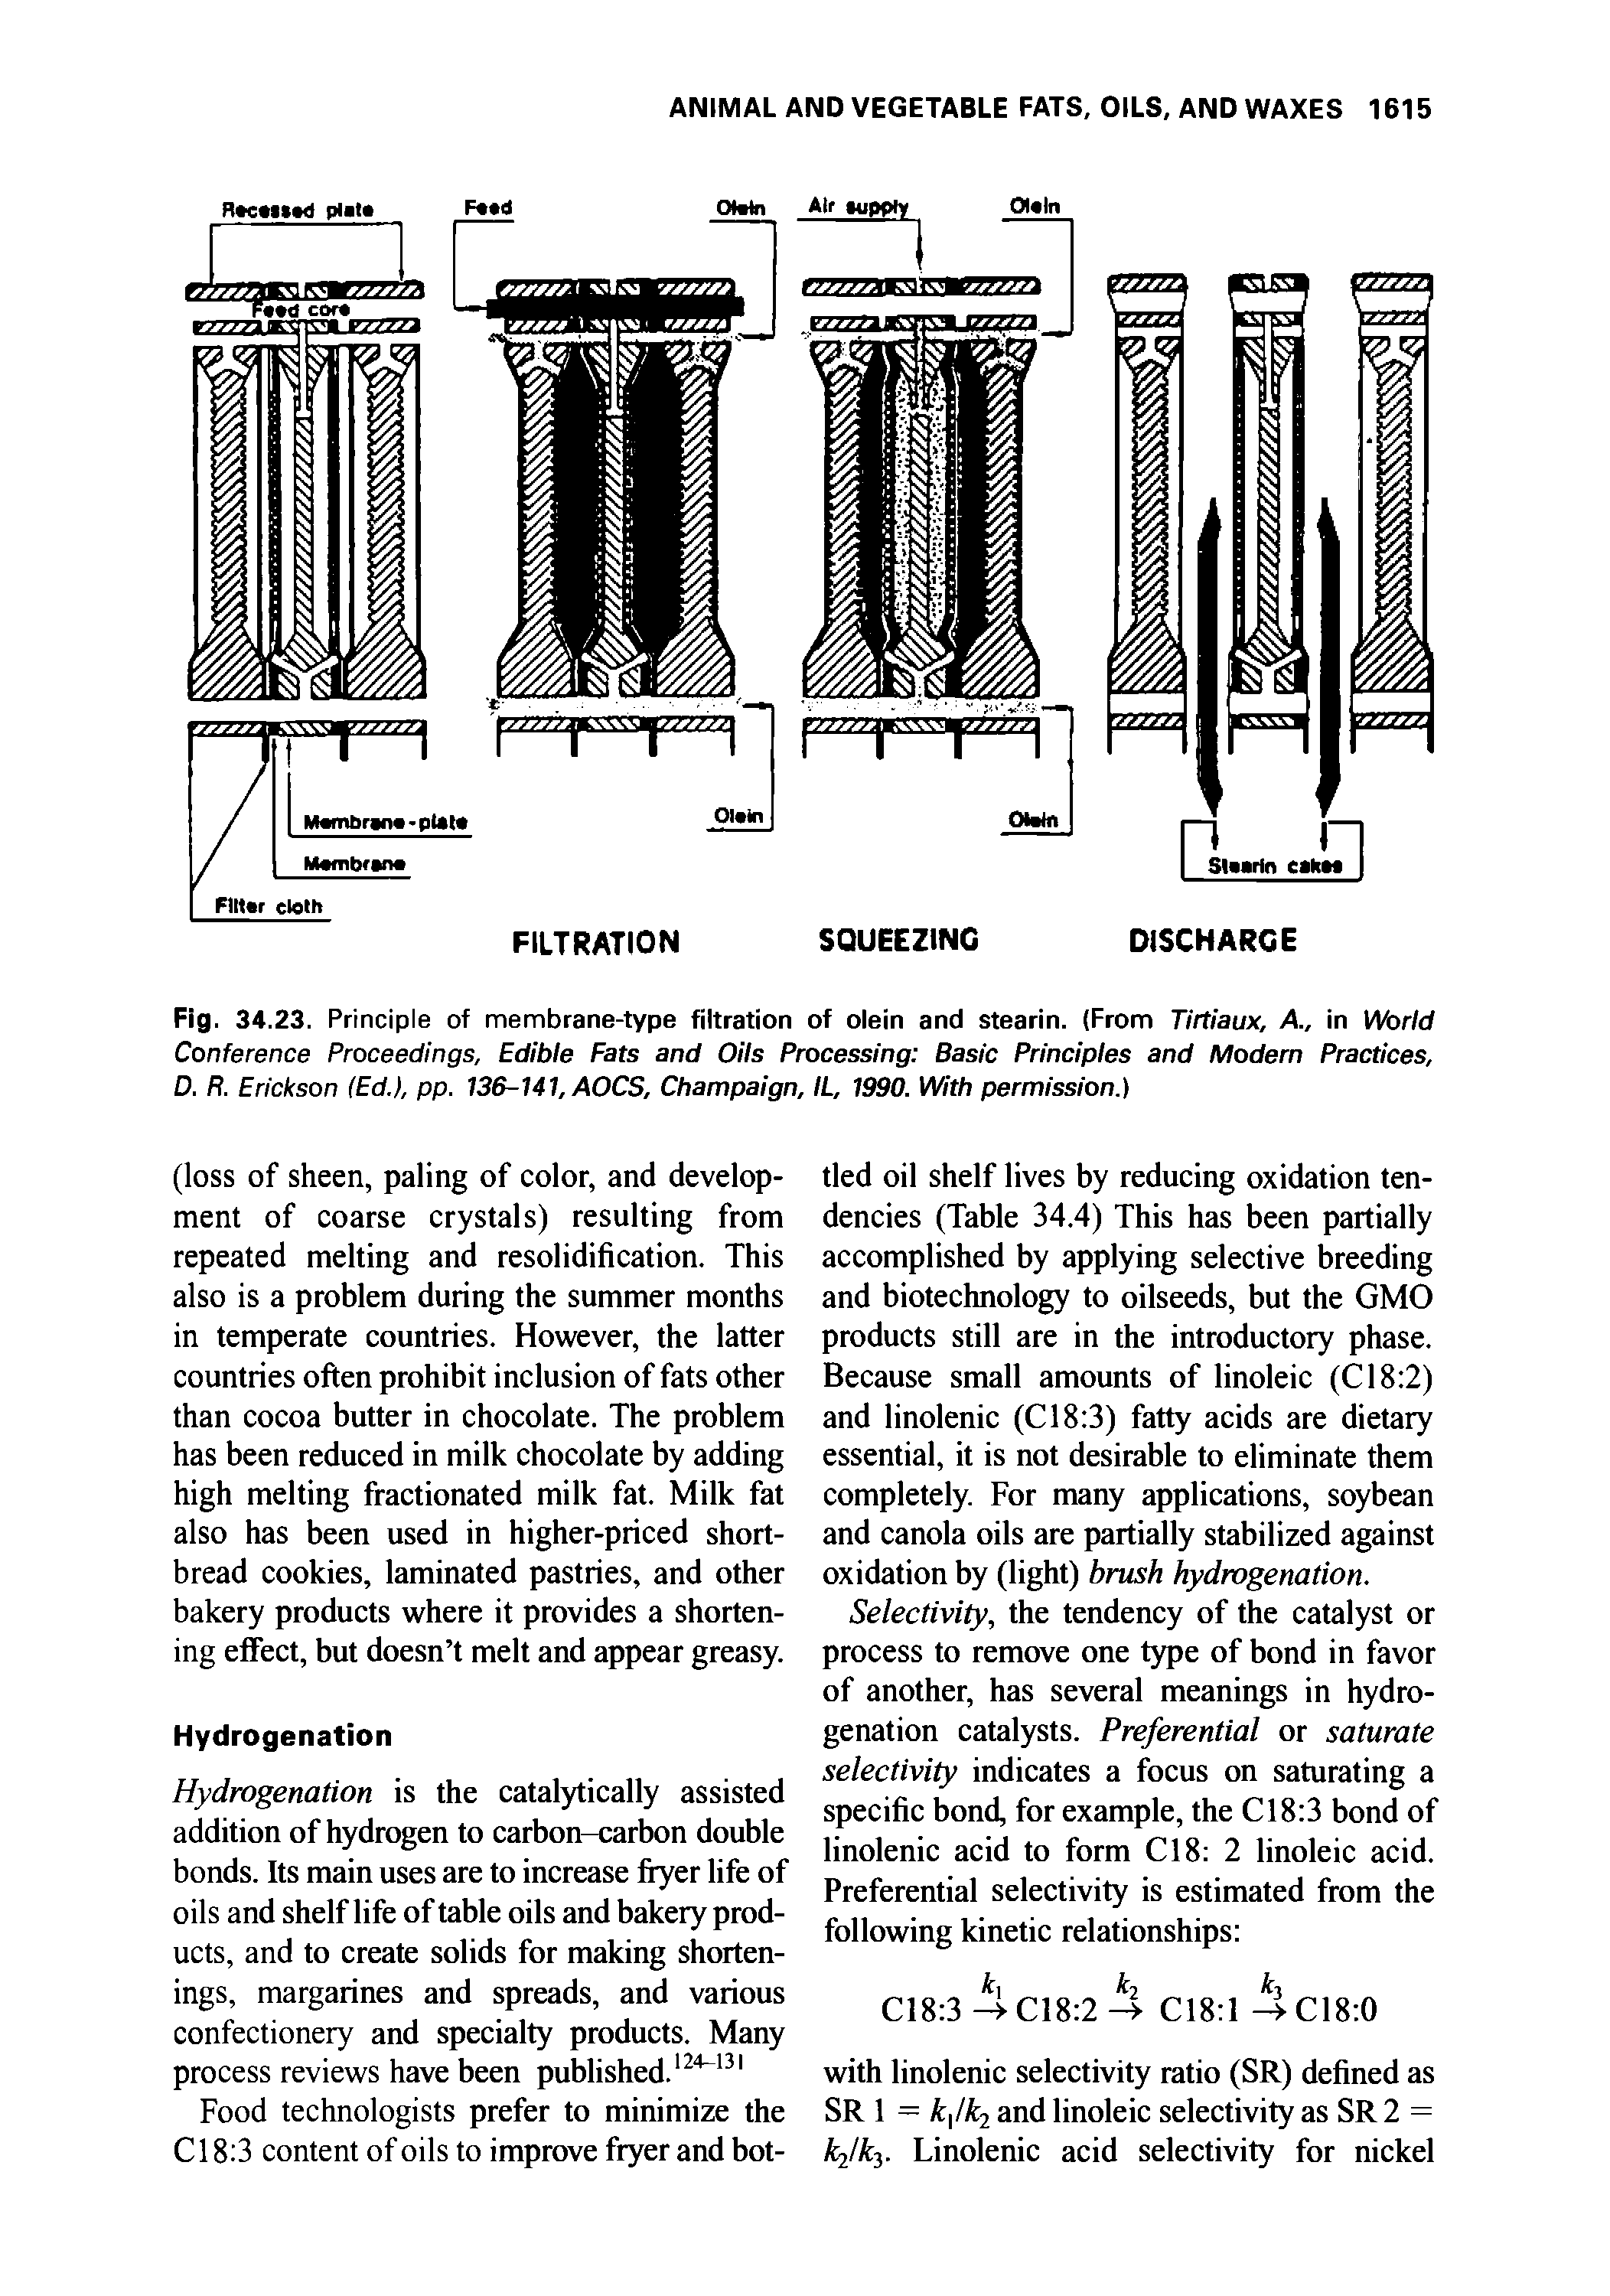 Fig. 34.23. Principle of membrane-type filtration of olein and stearin. (From Tirtiaux, A., in World Conference Proceedings, Edible Fats and Oils Processing Basic Principles and Modern Practices, D. R. Erickson (Ed.), pp. 136-141, AOCS, Champaign, IL, 1990. With permission.)...